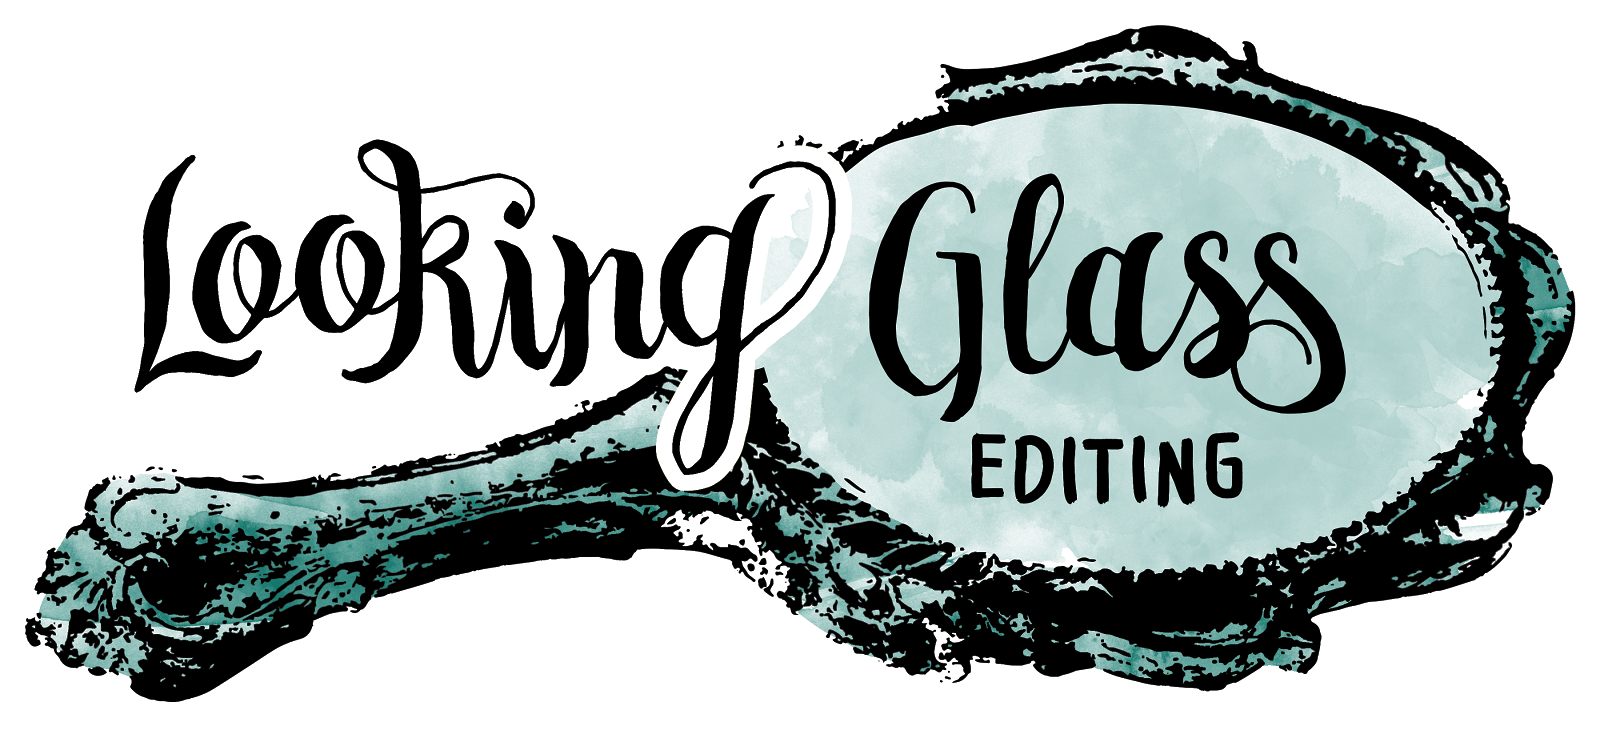 Looking Glass Editing Services